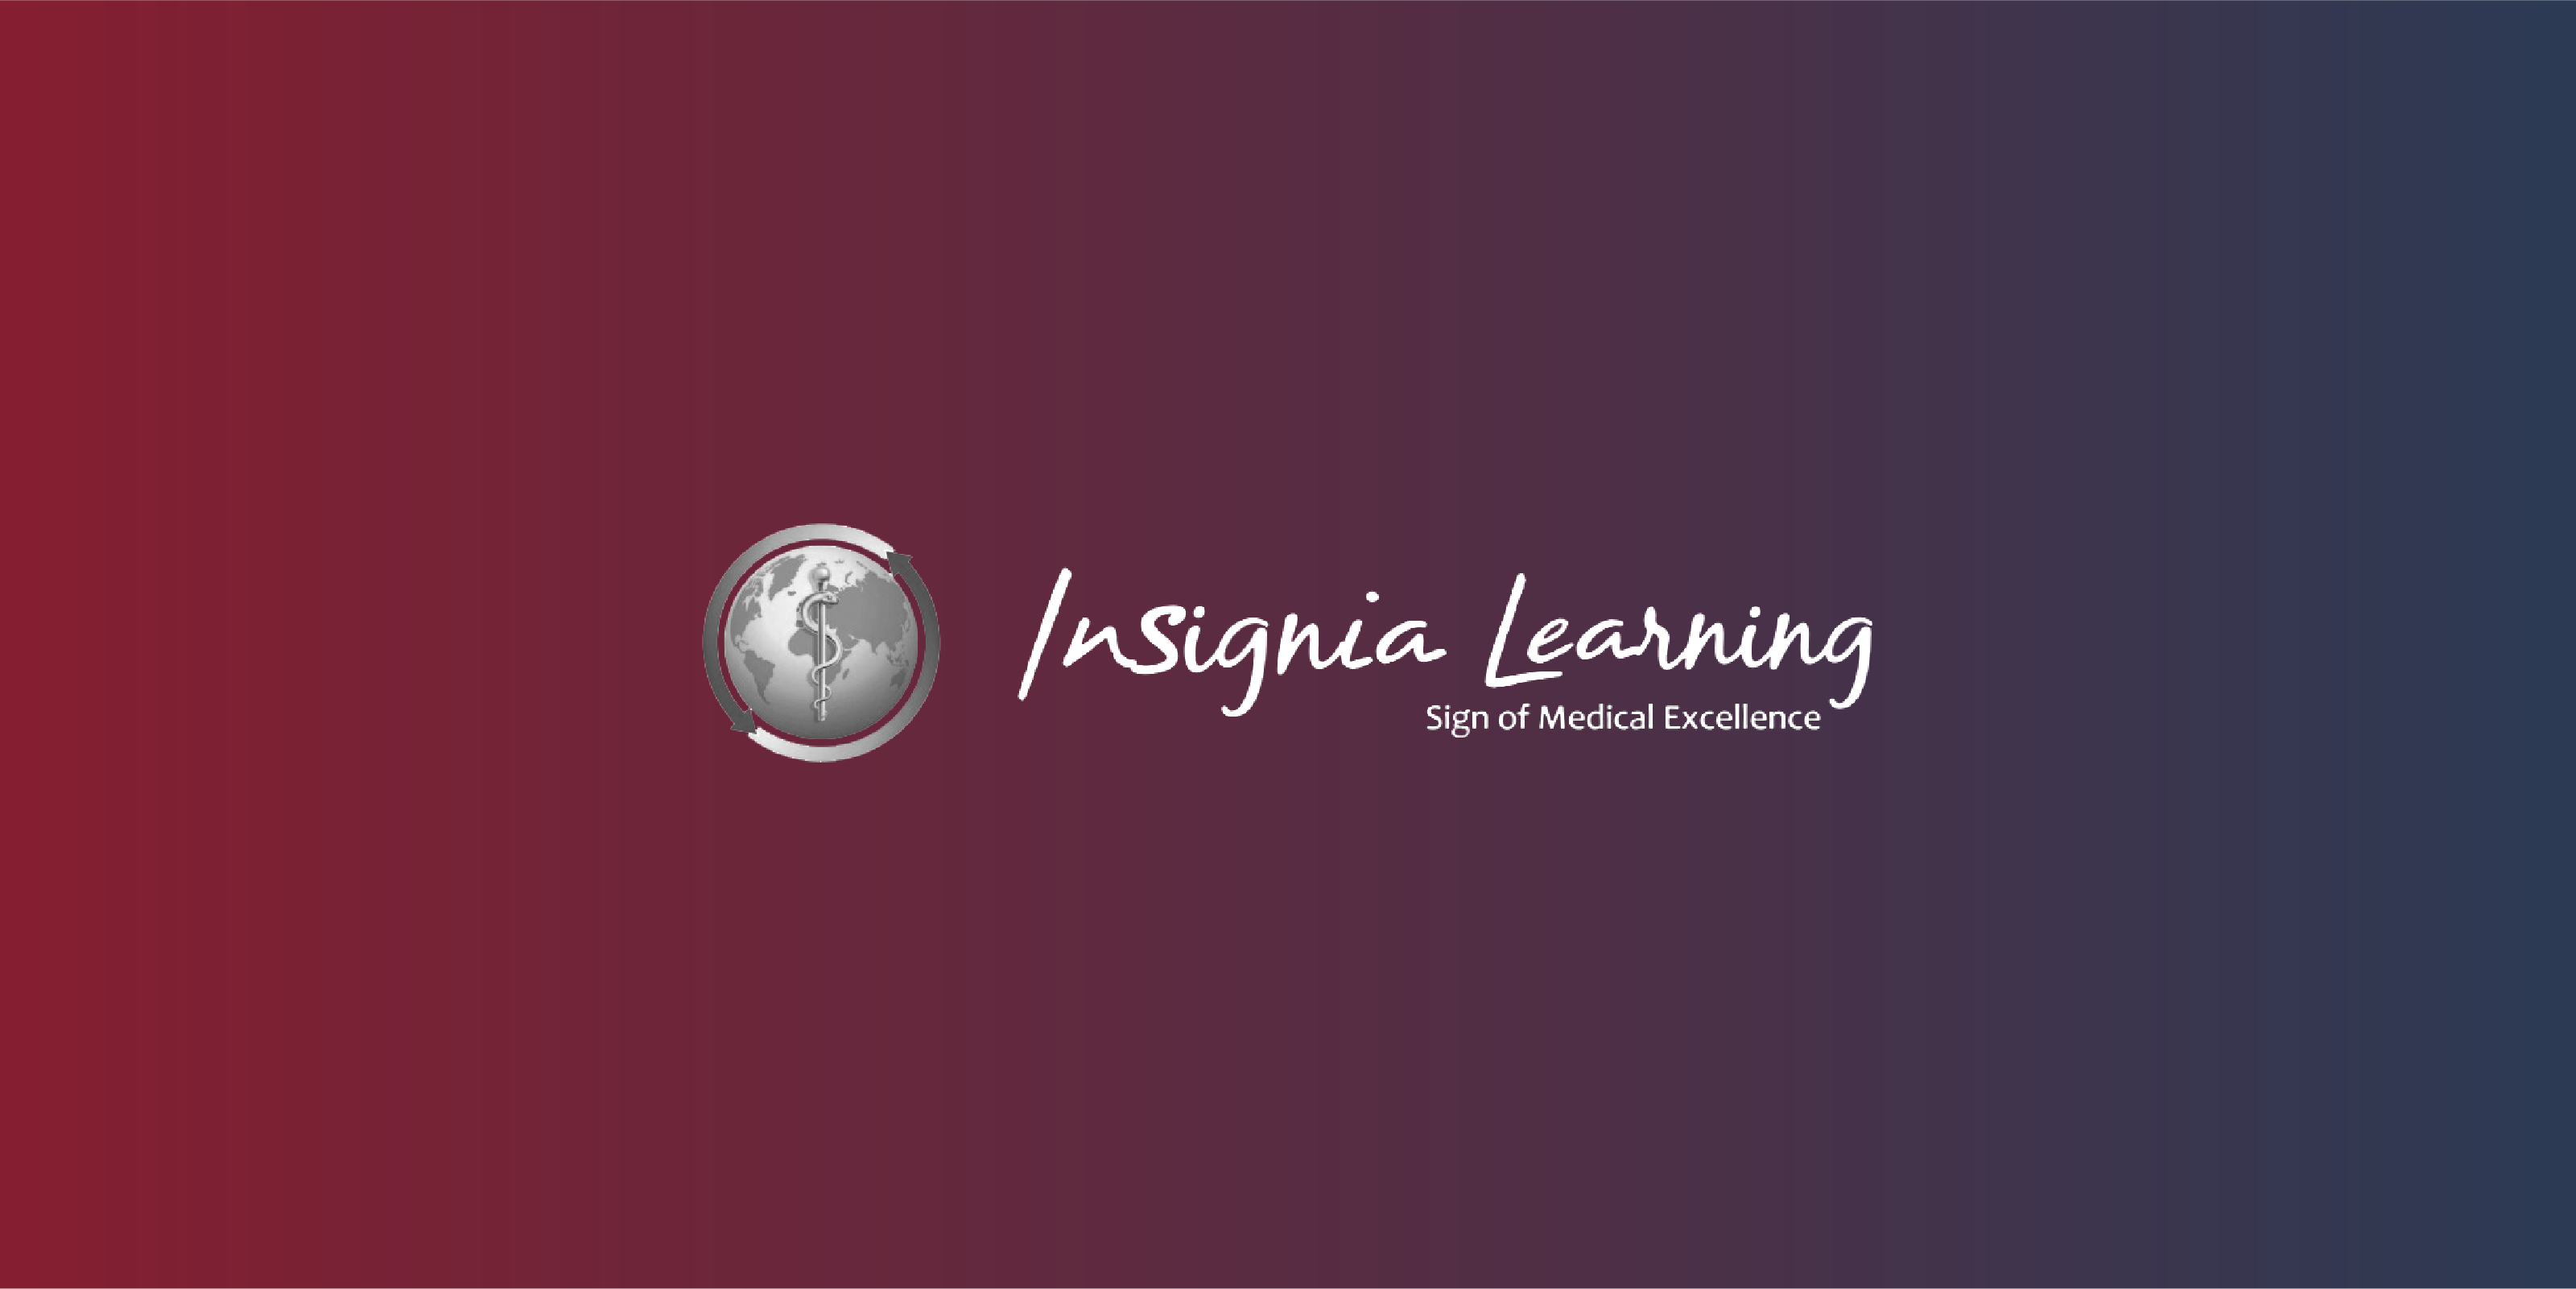 Insignia Learning